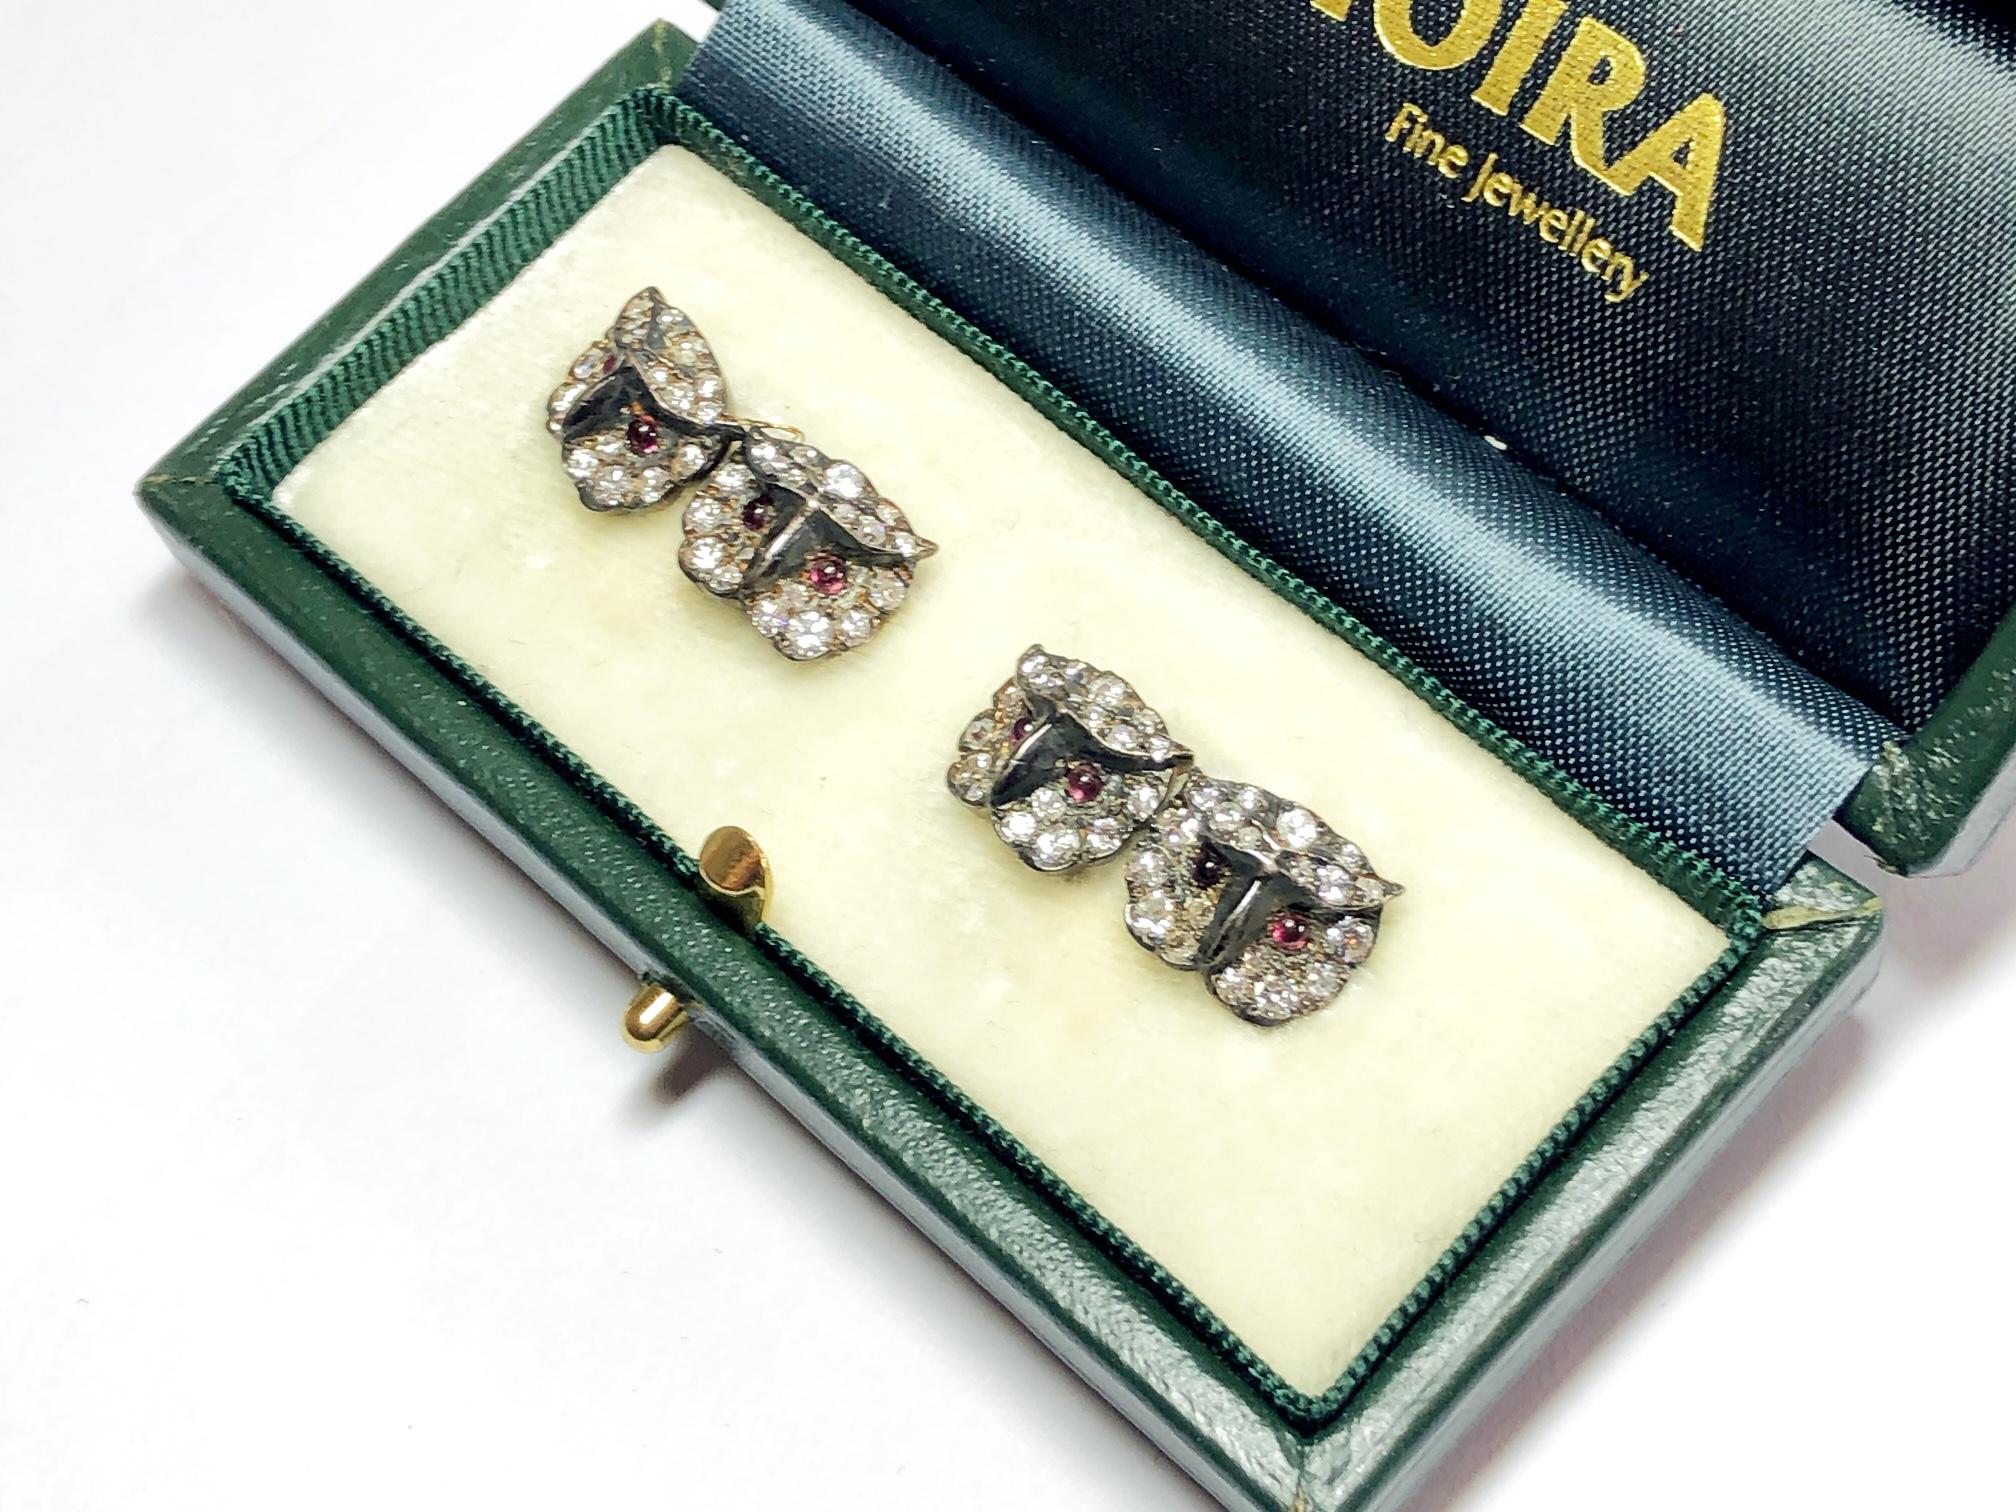 A pair of owl cufflinks, pavé set with a mixture of old and brilliant cut diamonds, with cabochon ruby set eyes, with chain links, mounted in silver-upon-gold, circa 1970. Each head of the owl measures approximately 10mm x 13mm.